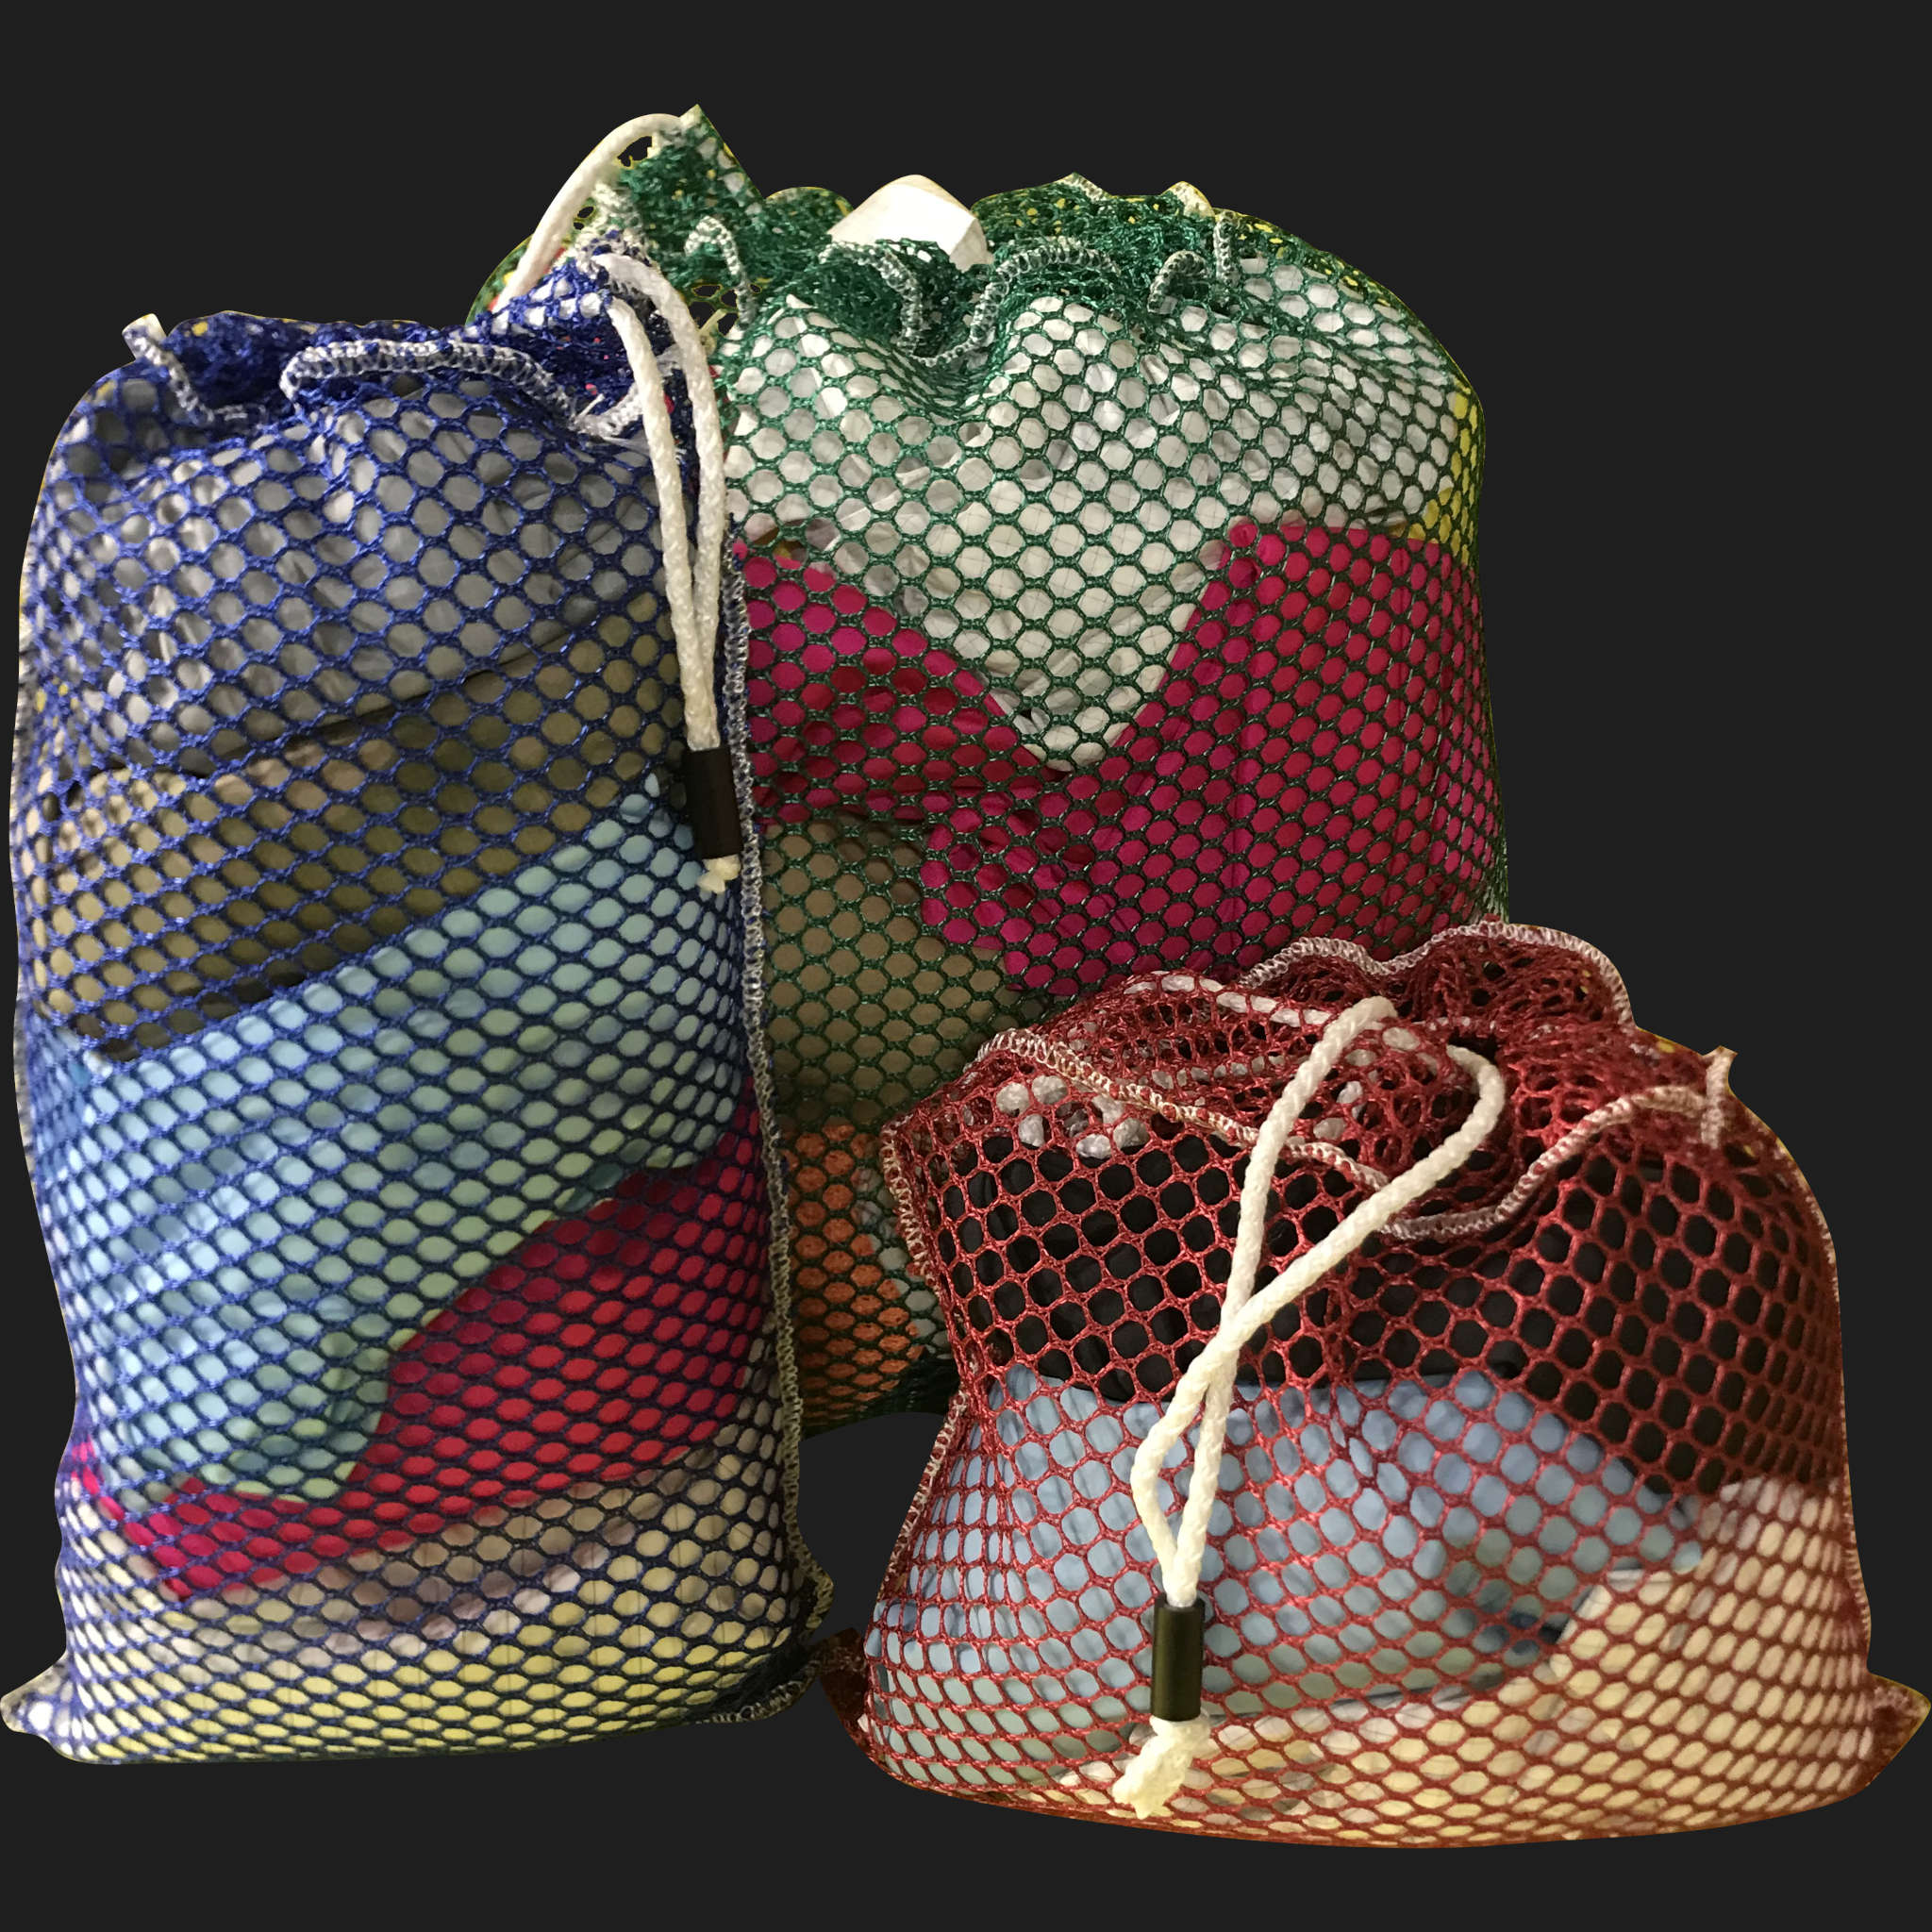 16" x 42" Customized Mesh-Net-Laundry Bags Heavy Duty with Cord and barrellock closure